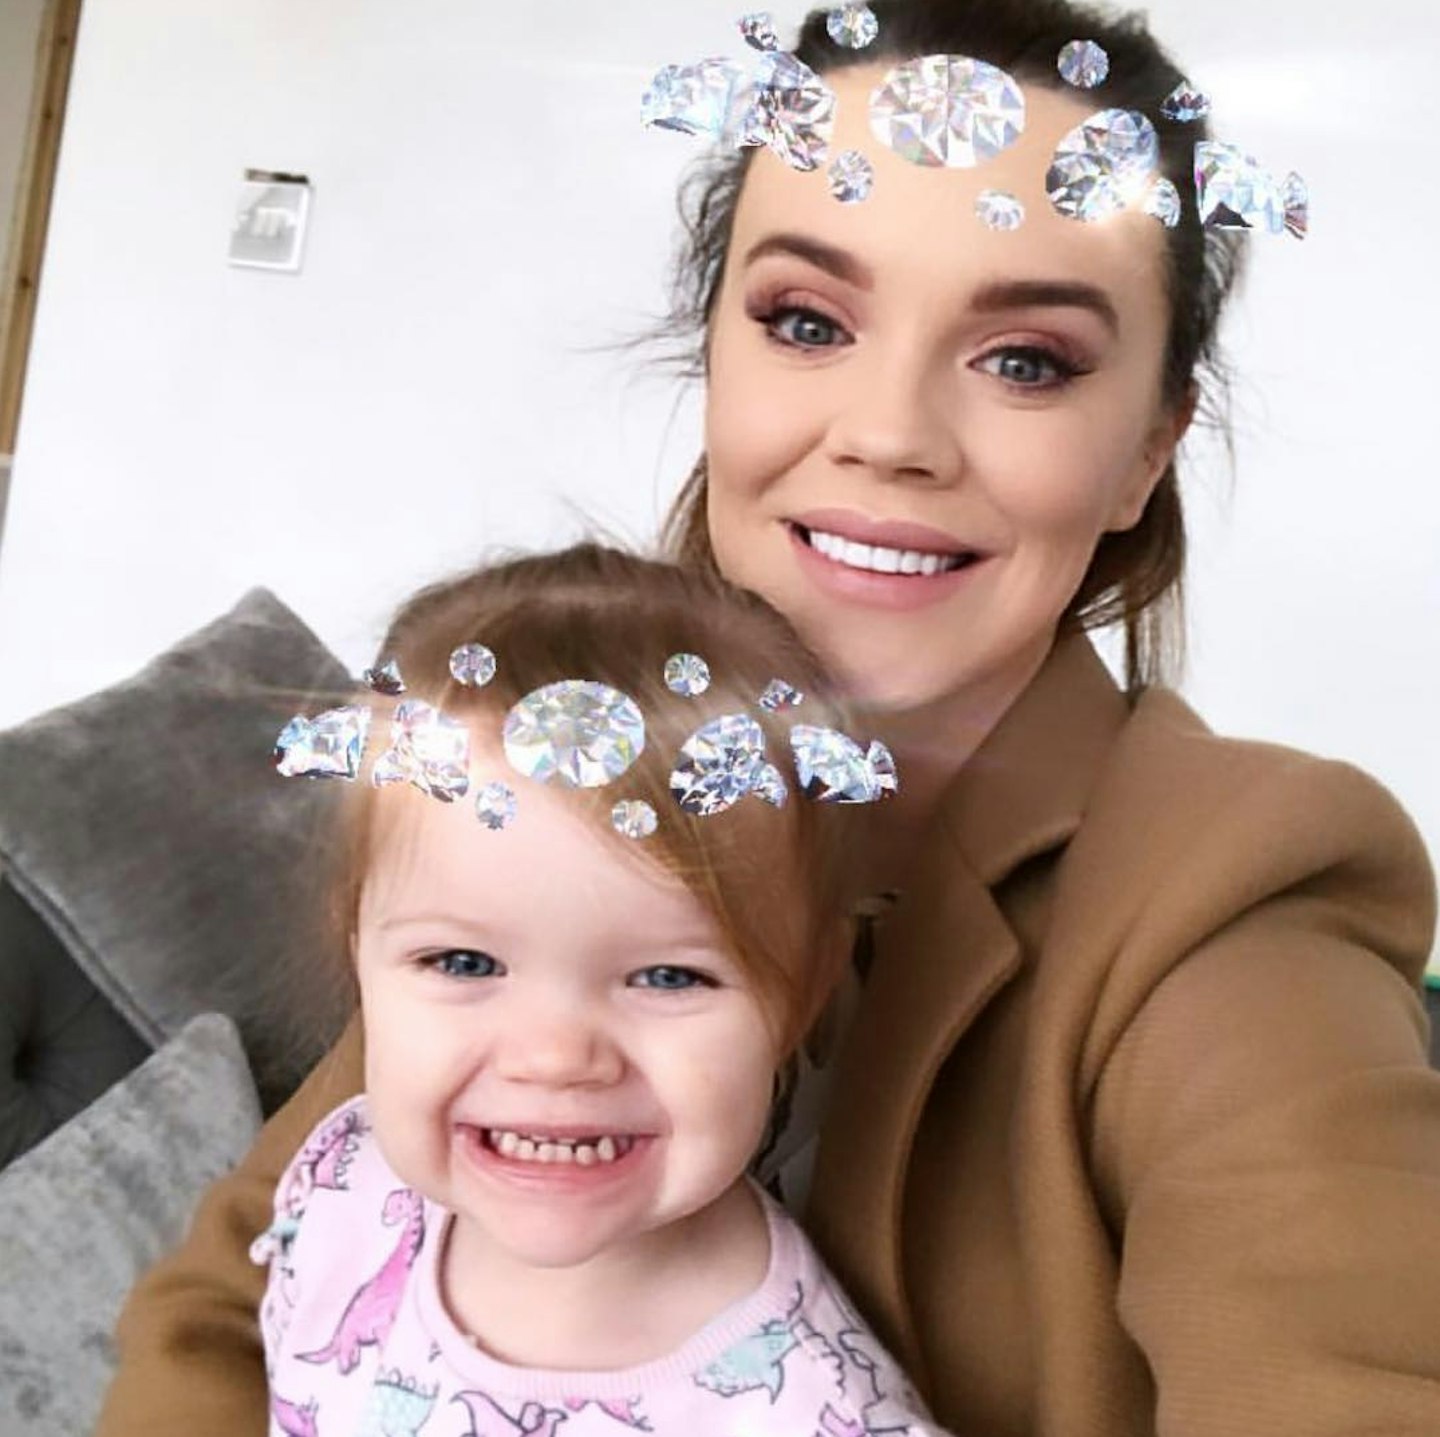 Love Island's Kady McDermott brands Maria Fowler's daughter 'vile' in shocking messages